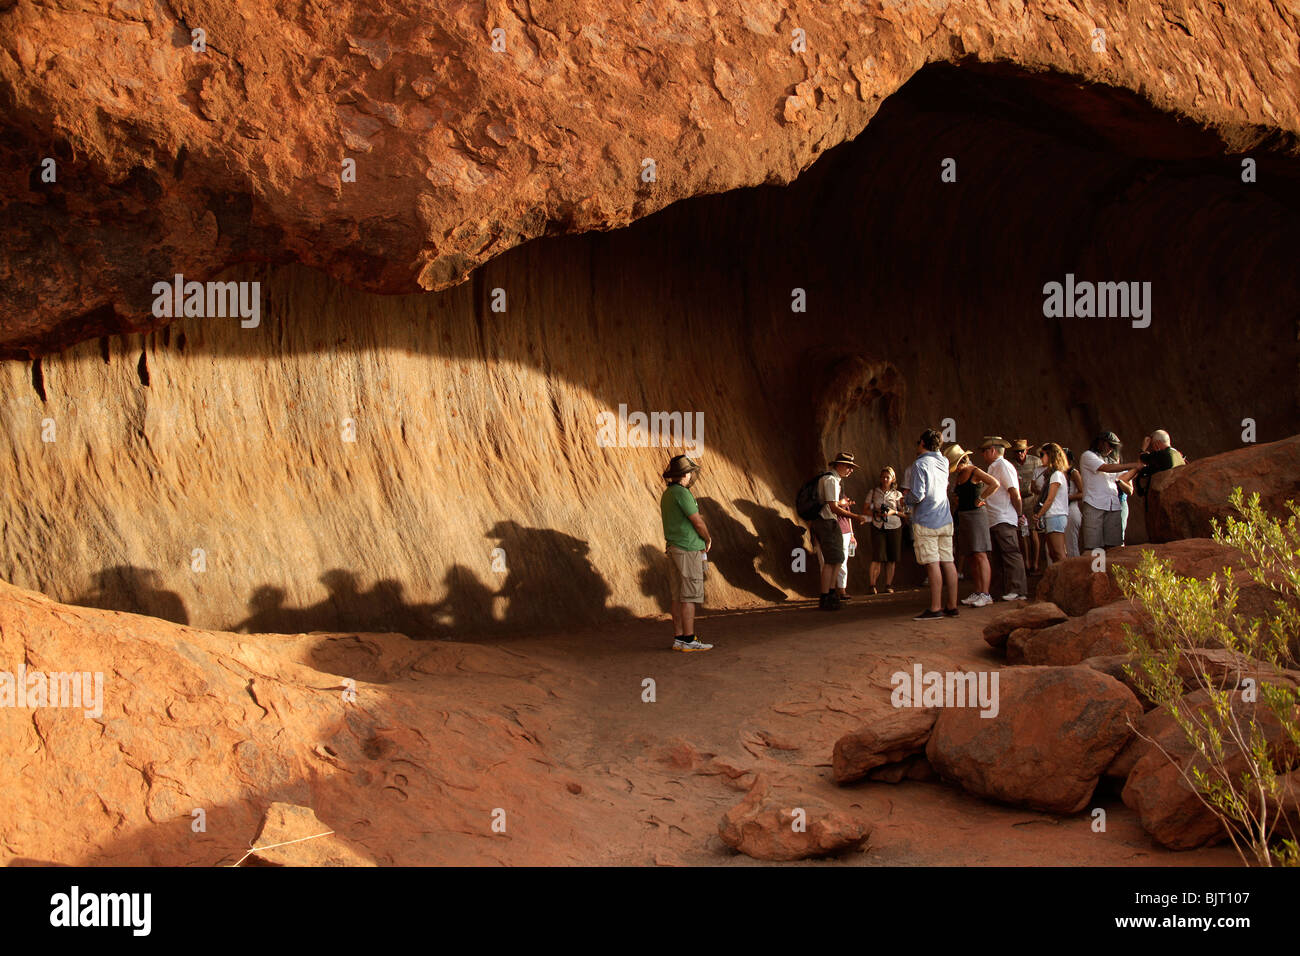 tourists in a cave of world-renowned sandstone formation Uluru or Ayers Rock , Northern Territory, Australia Stock Photo